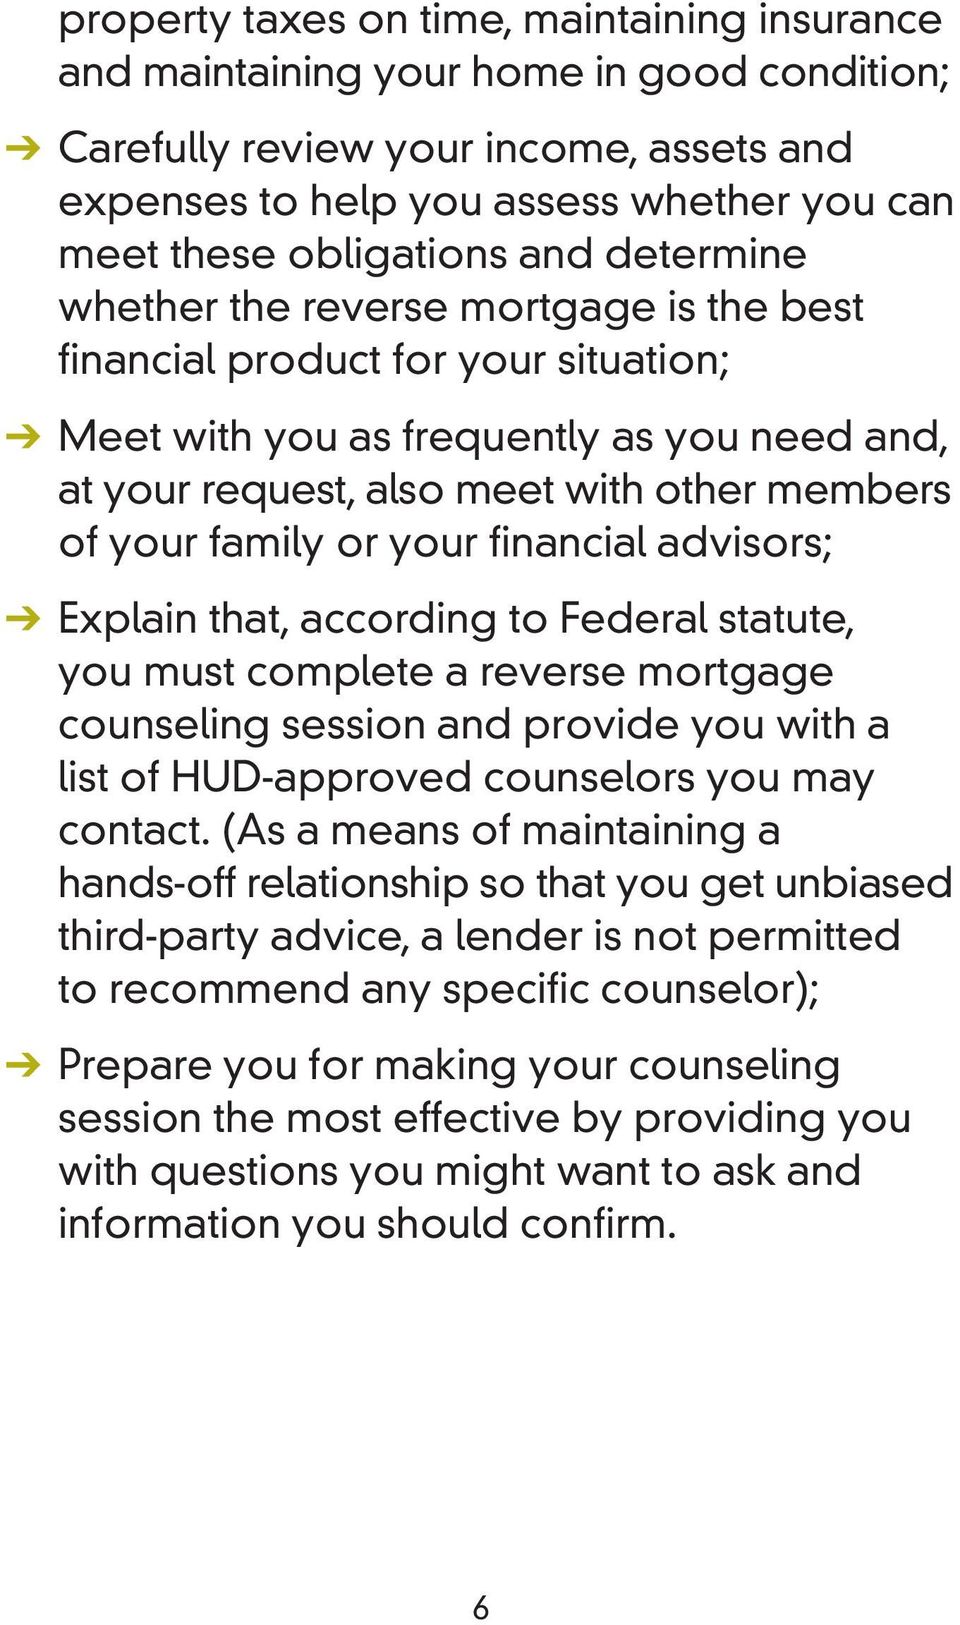 or your financial advisors; Explain that, according to Federal statute, you must complete a reverse mortgage counseling session and provide you with a list of HUD-approved counselors you may contact.